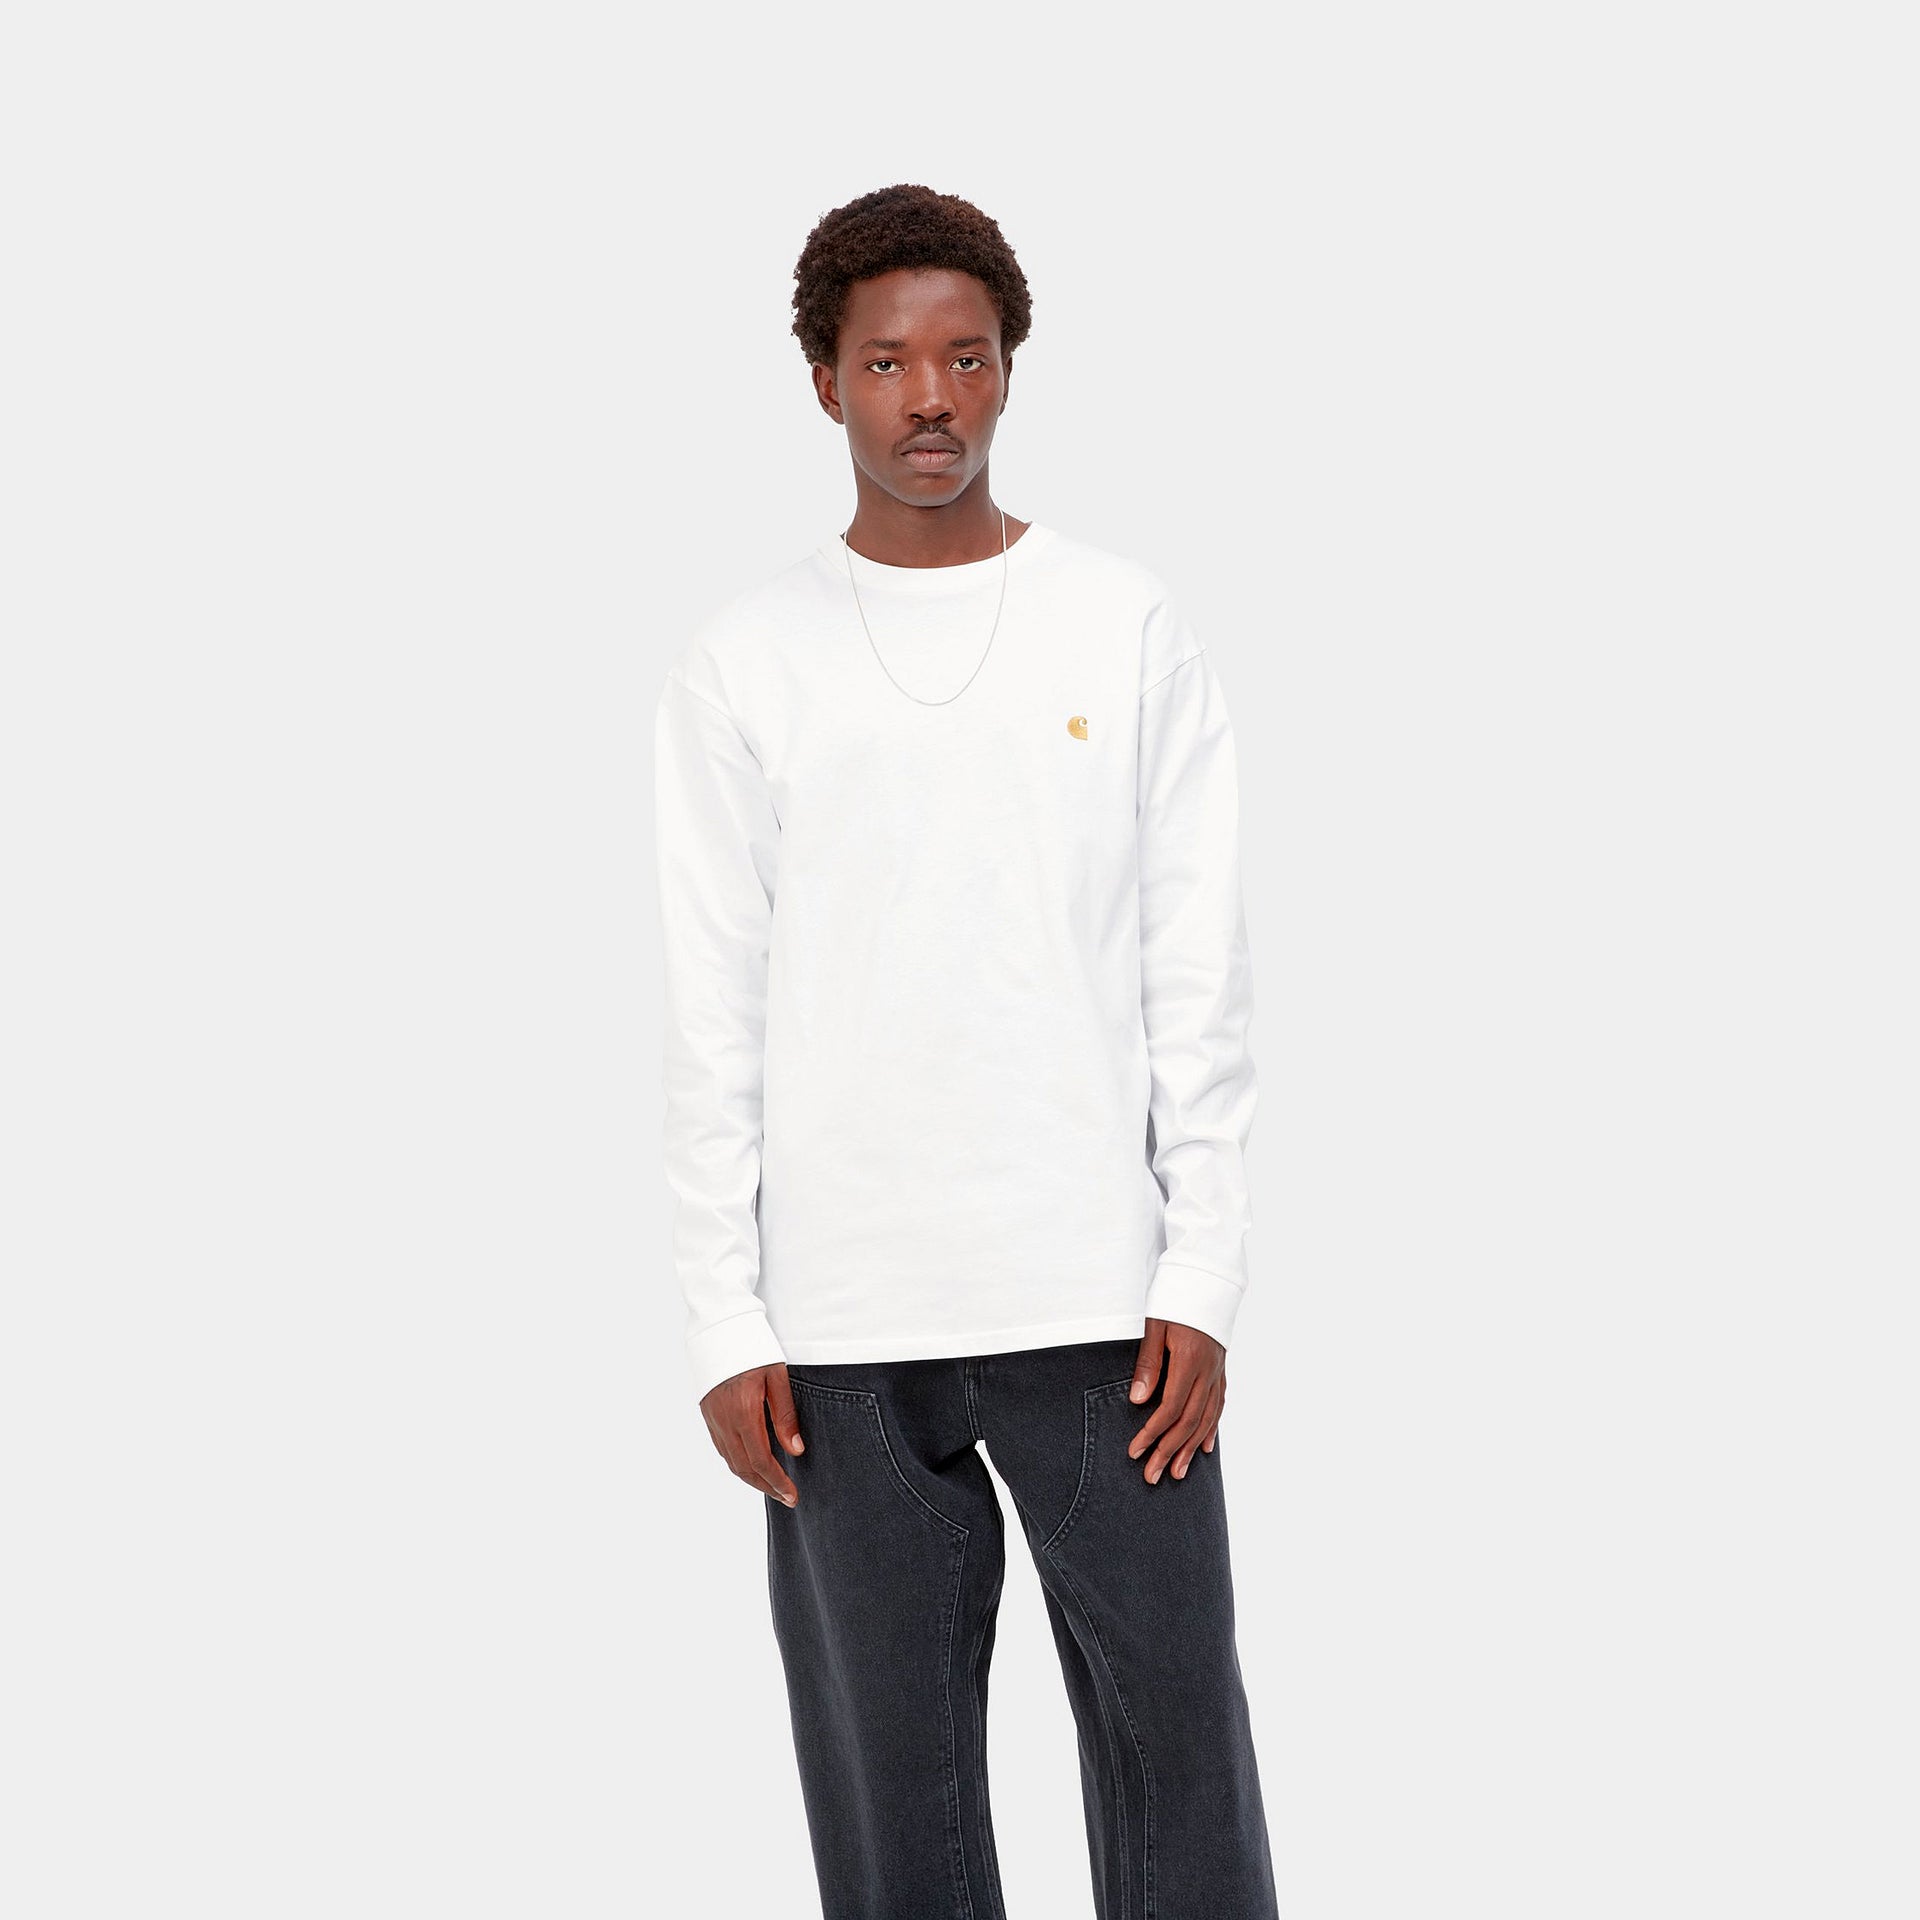 Carhartt WIP L/S Chase T-Shirt